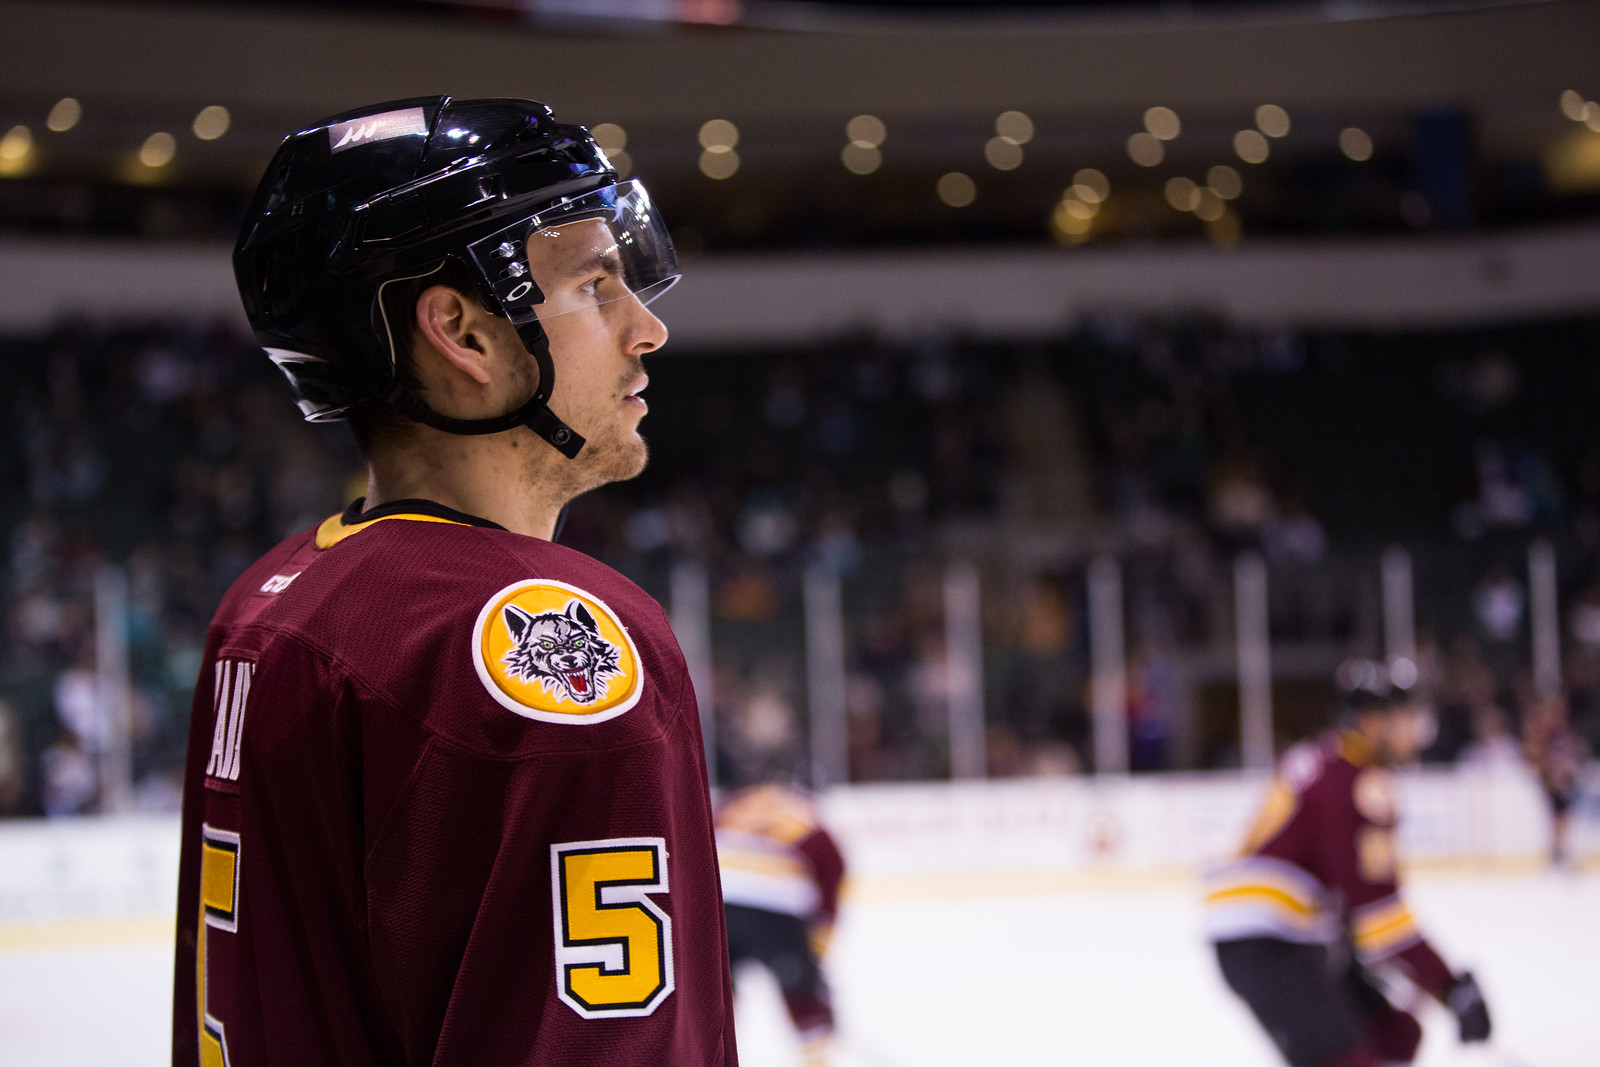 Report of New AHL Team in Kansas City Puts Chicago Wolves in Awkward Place